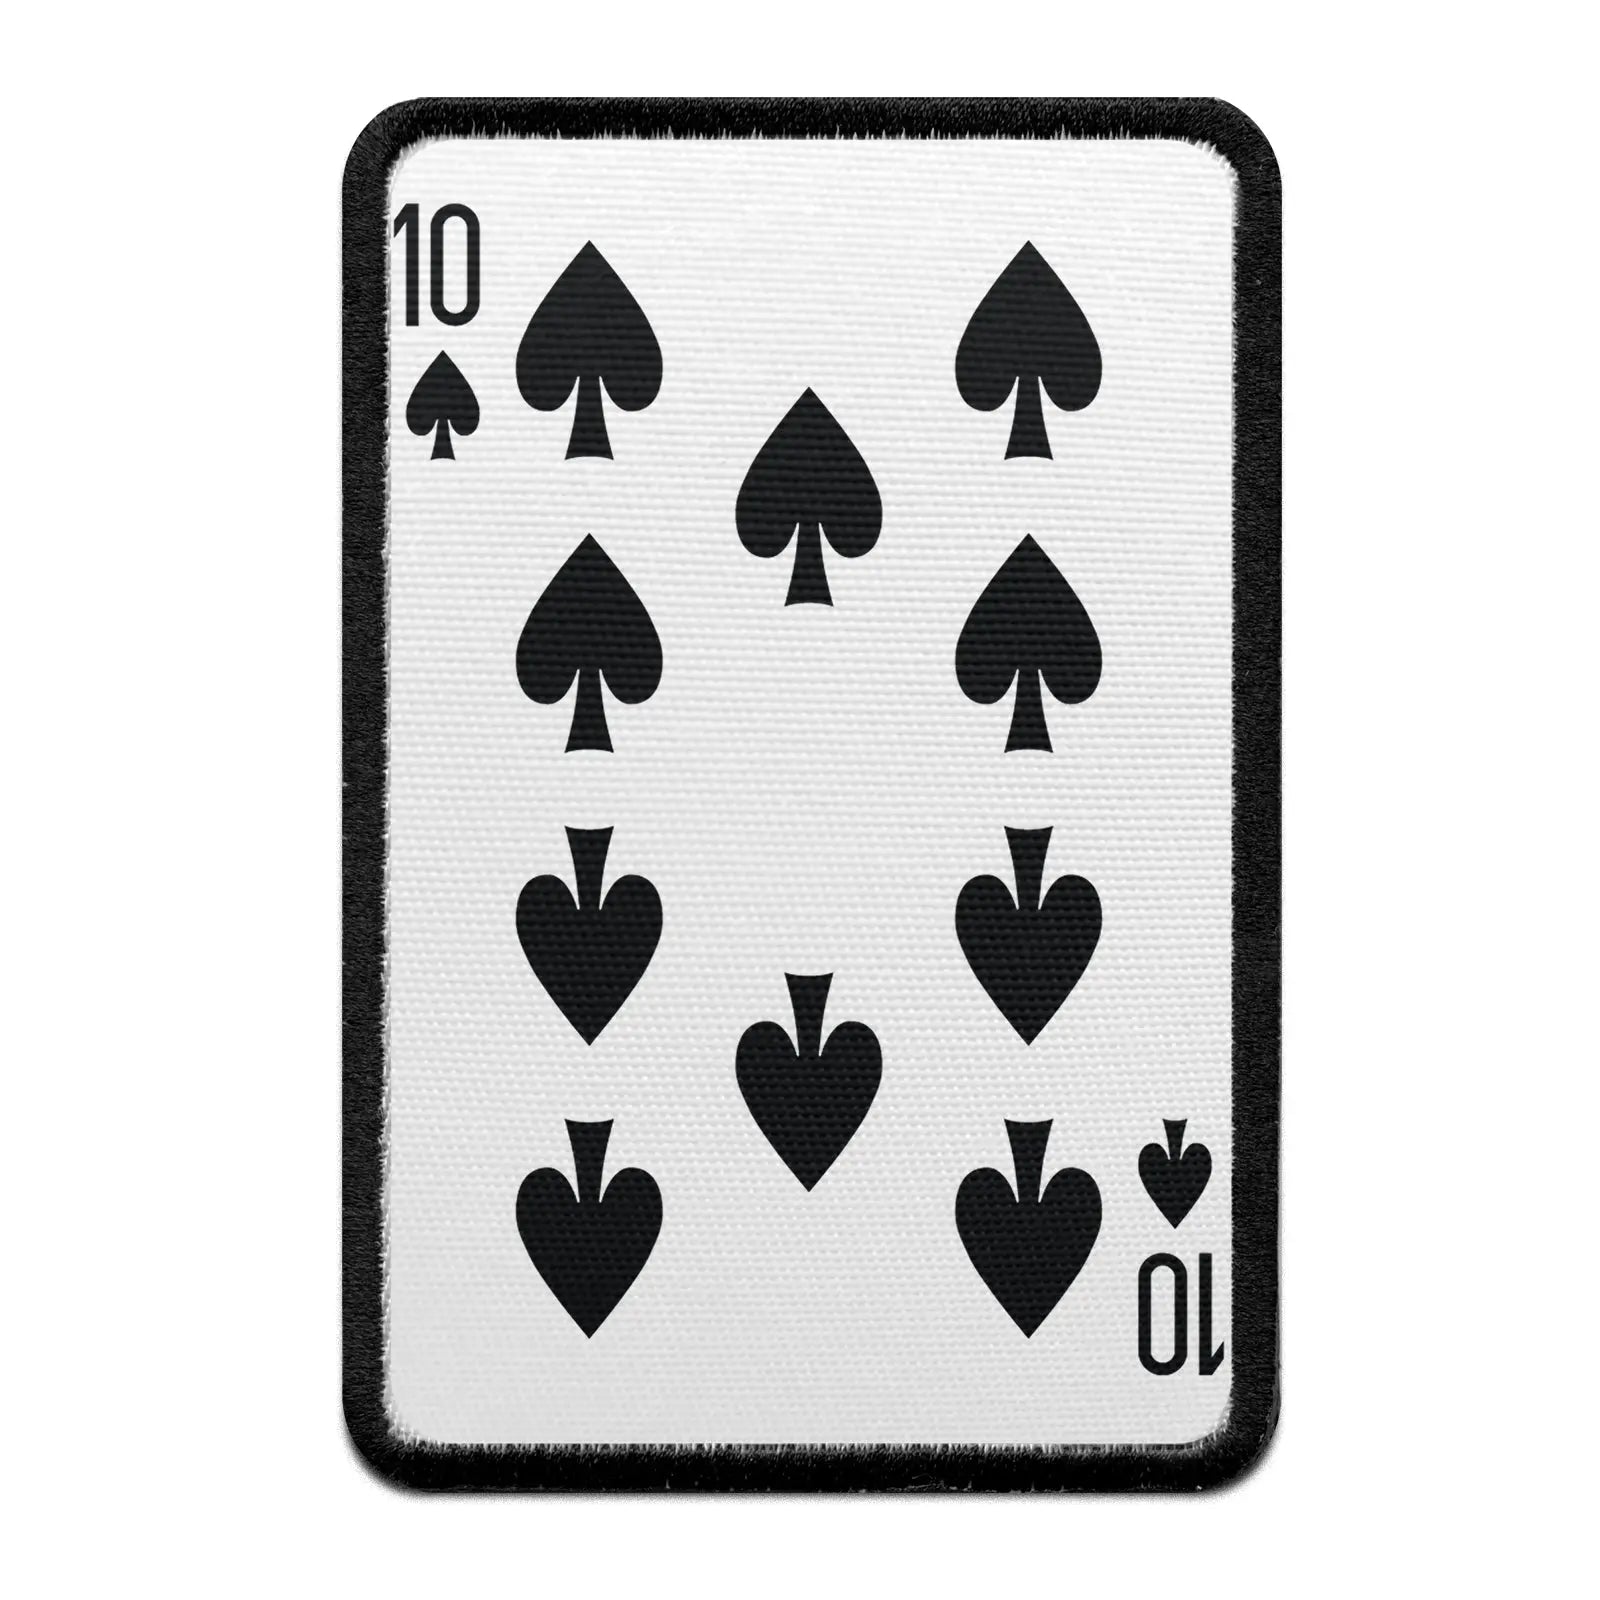 Ten Of Spades Card FotoPatch Game Deck Embroidered Iron On 